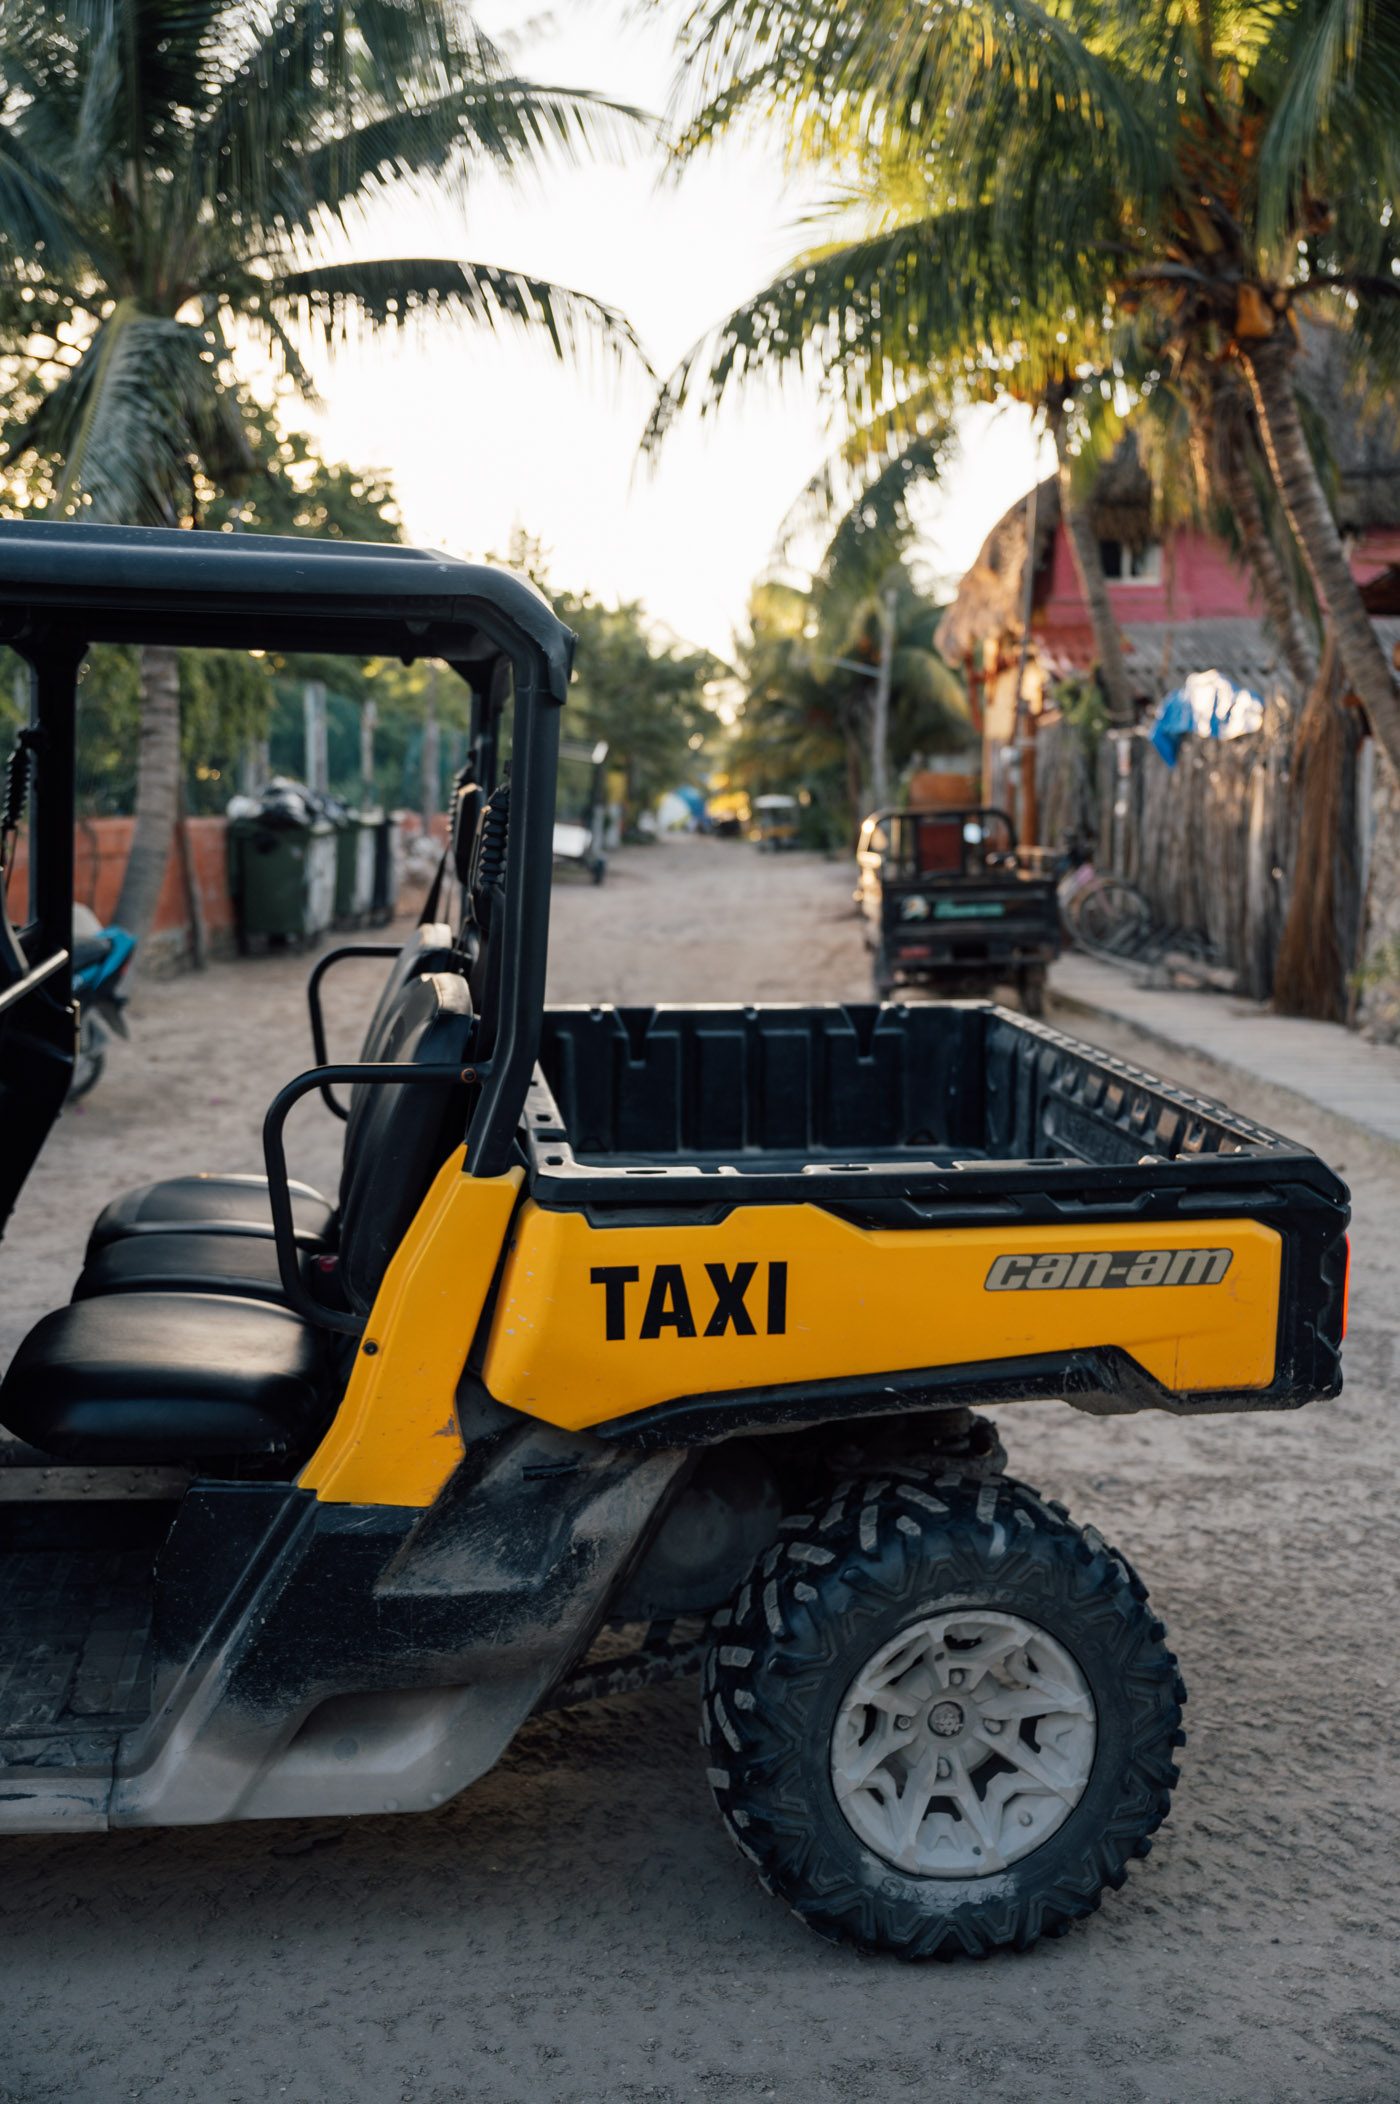 Golf carts are the official mode of transport on Holbox